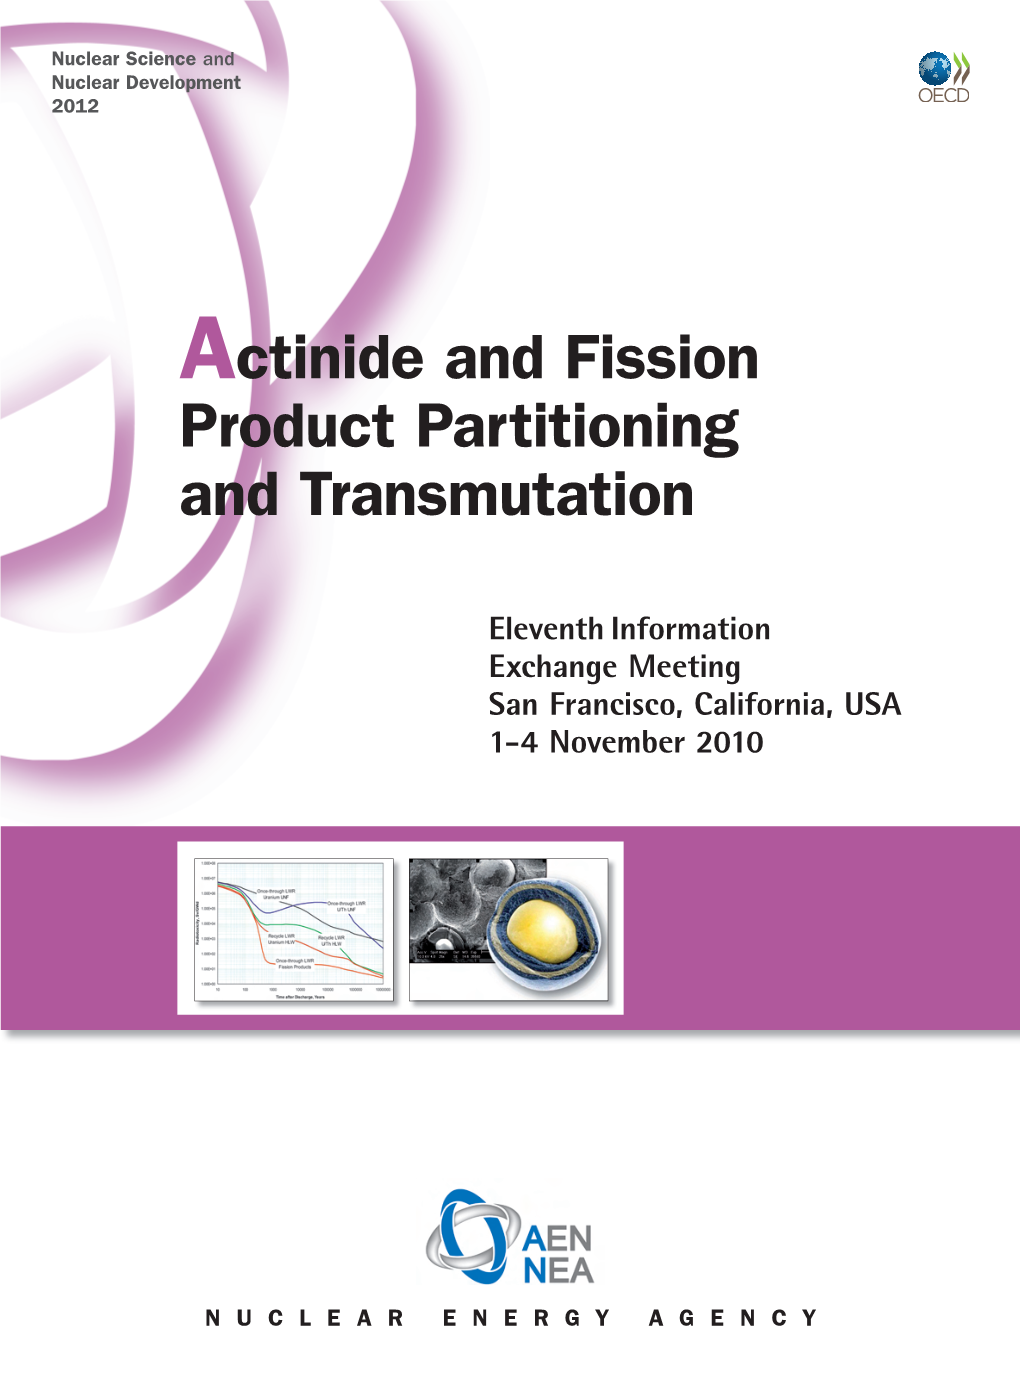 Actinide and Fission Product Partitioning and Transmutation